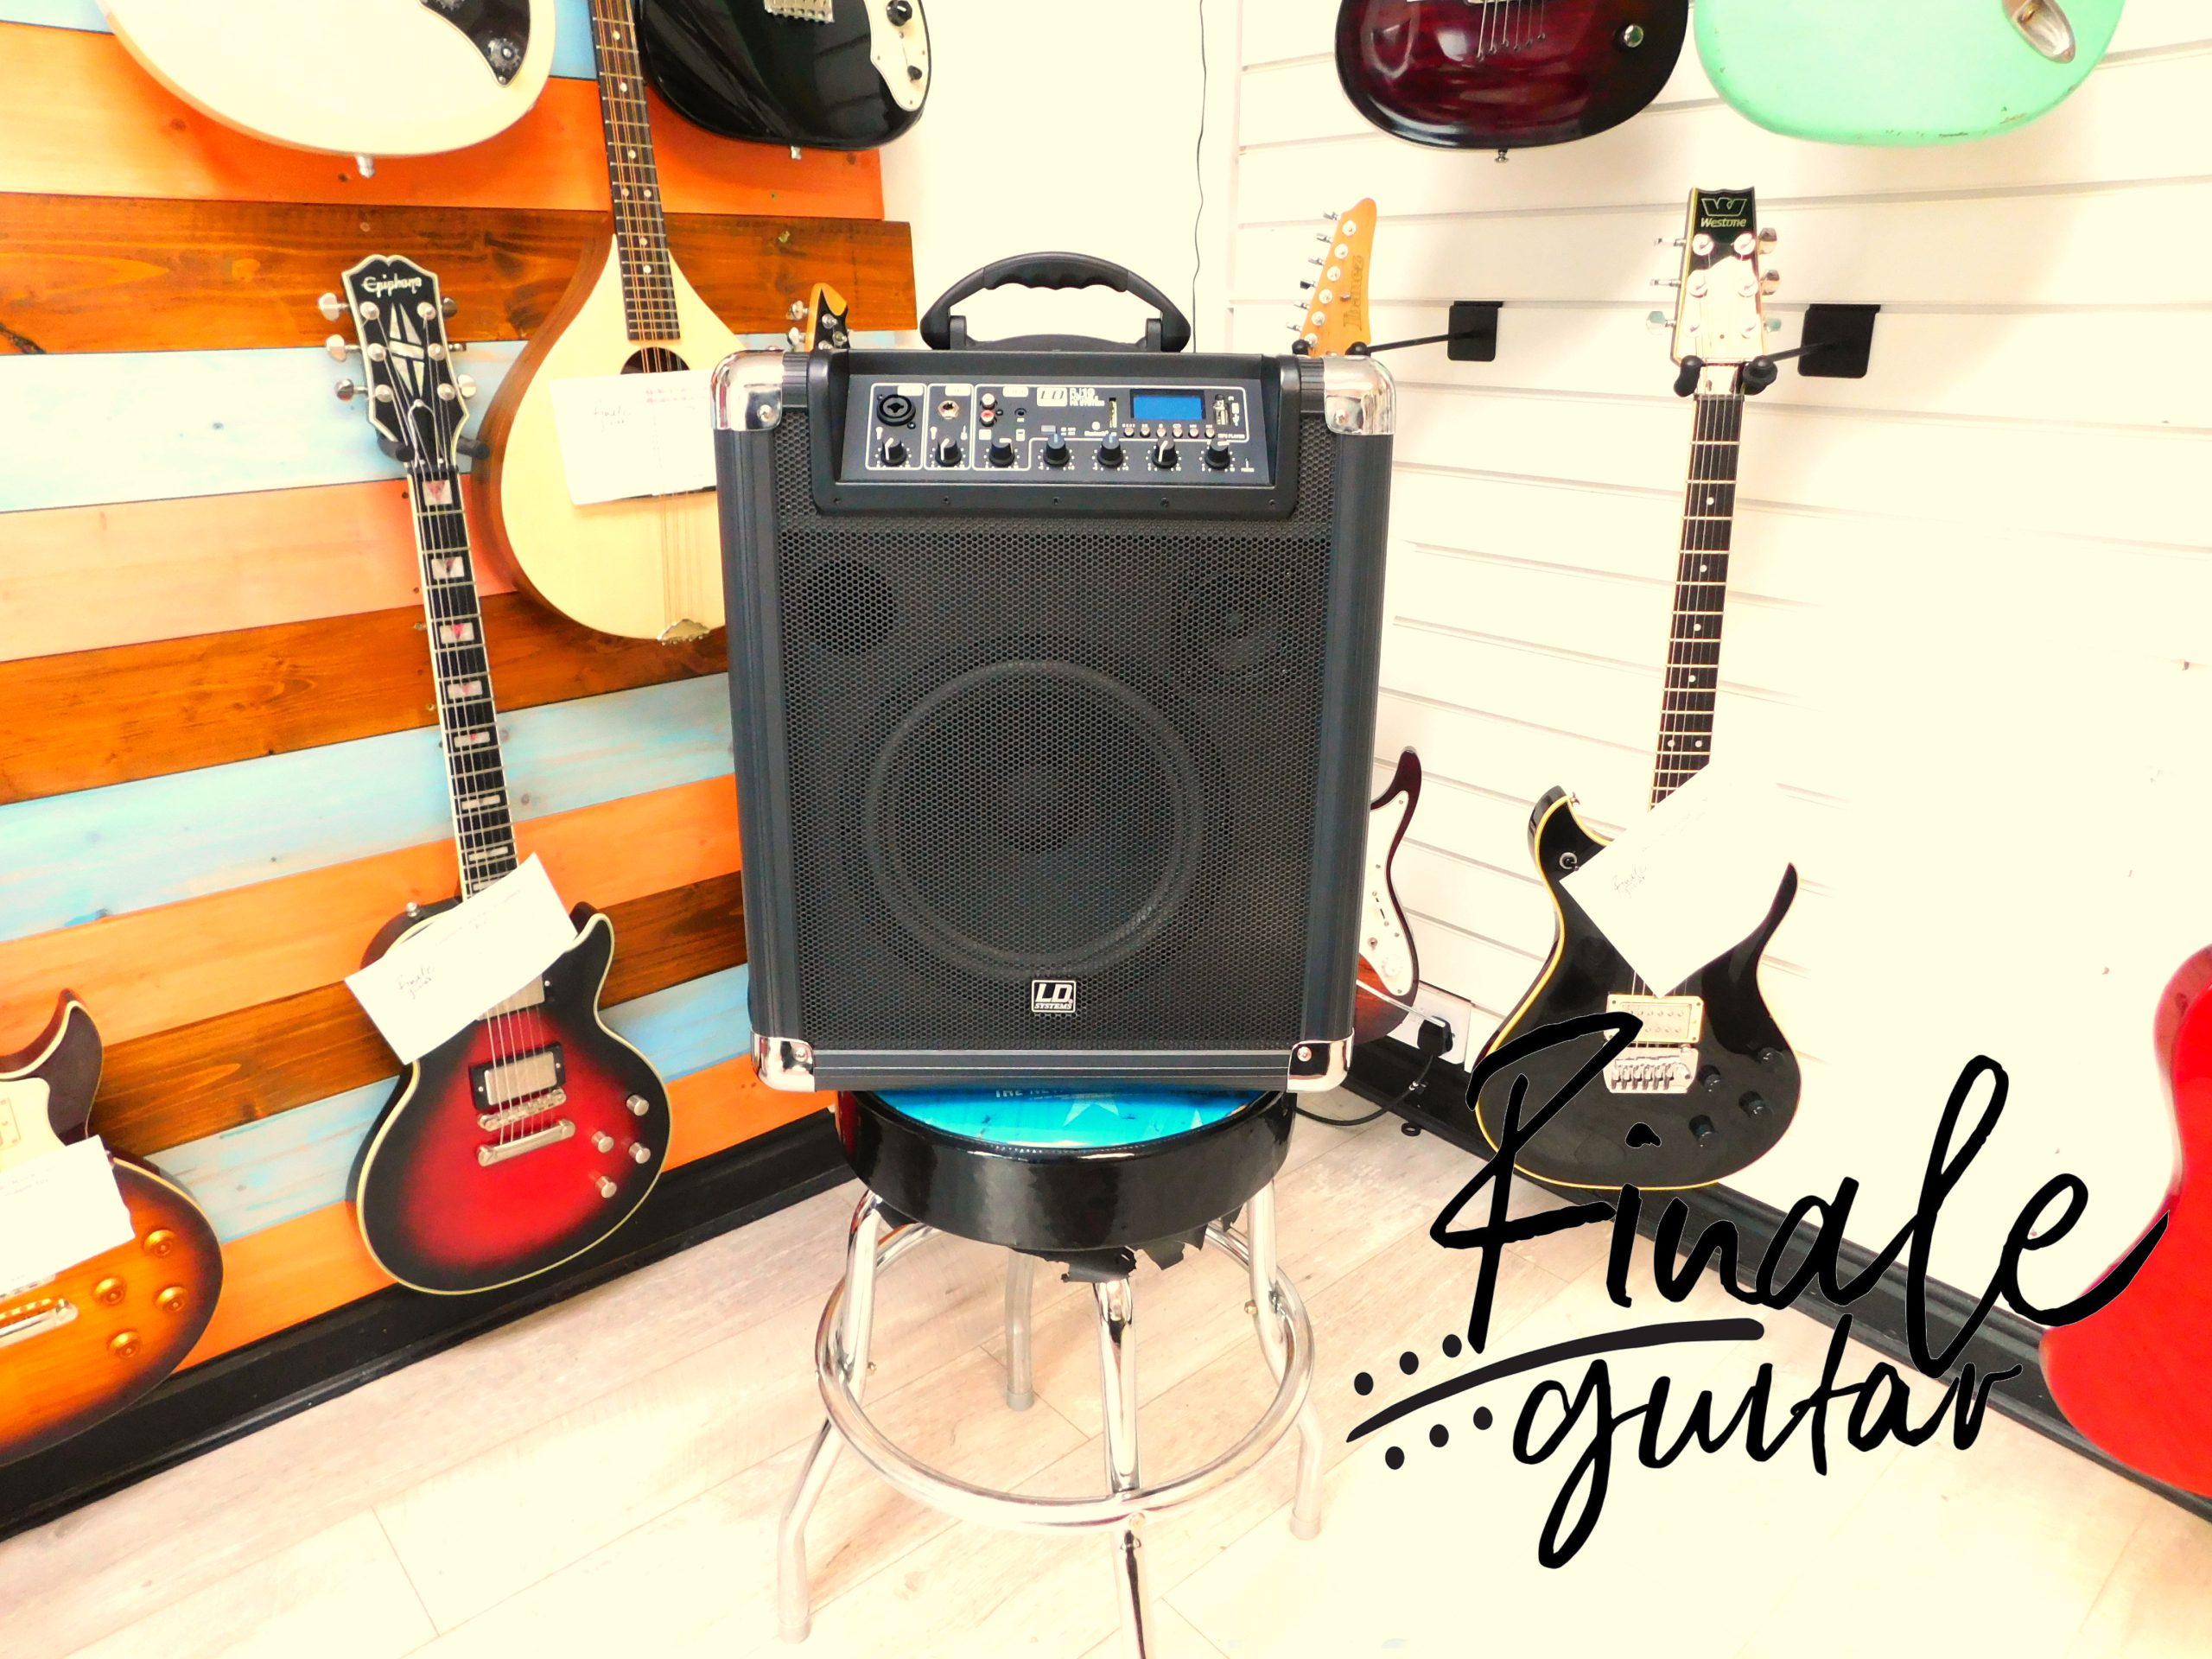 LD Systems Roadjack 10 for sale in our Sheffield guitar shop, Finale Guitar